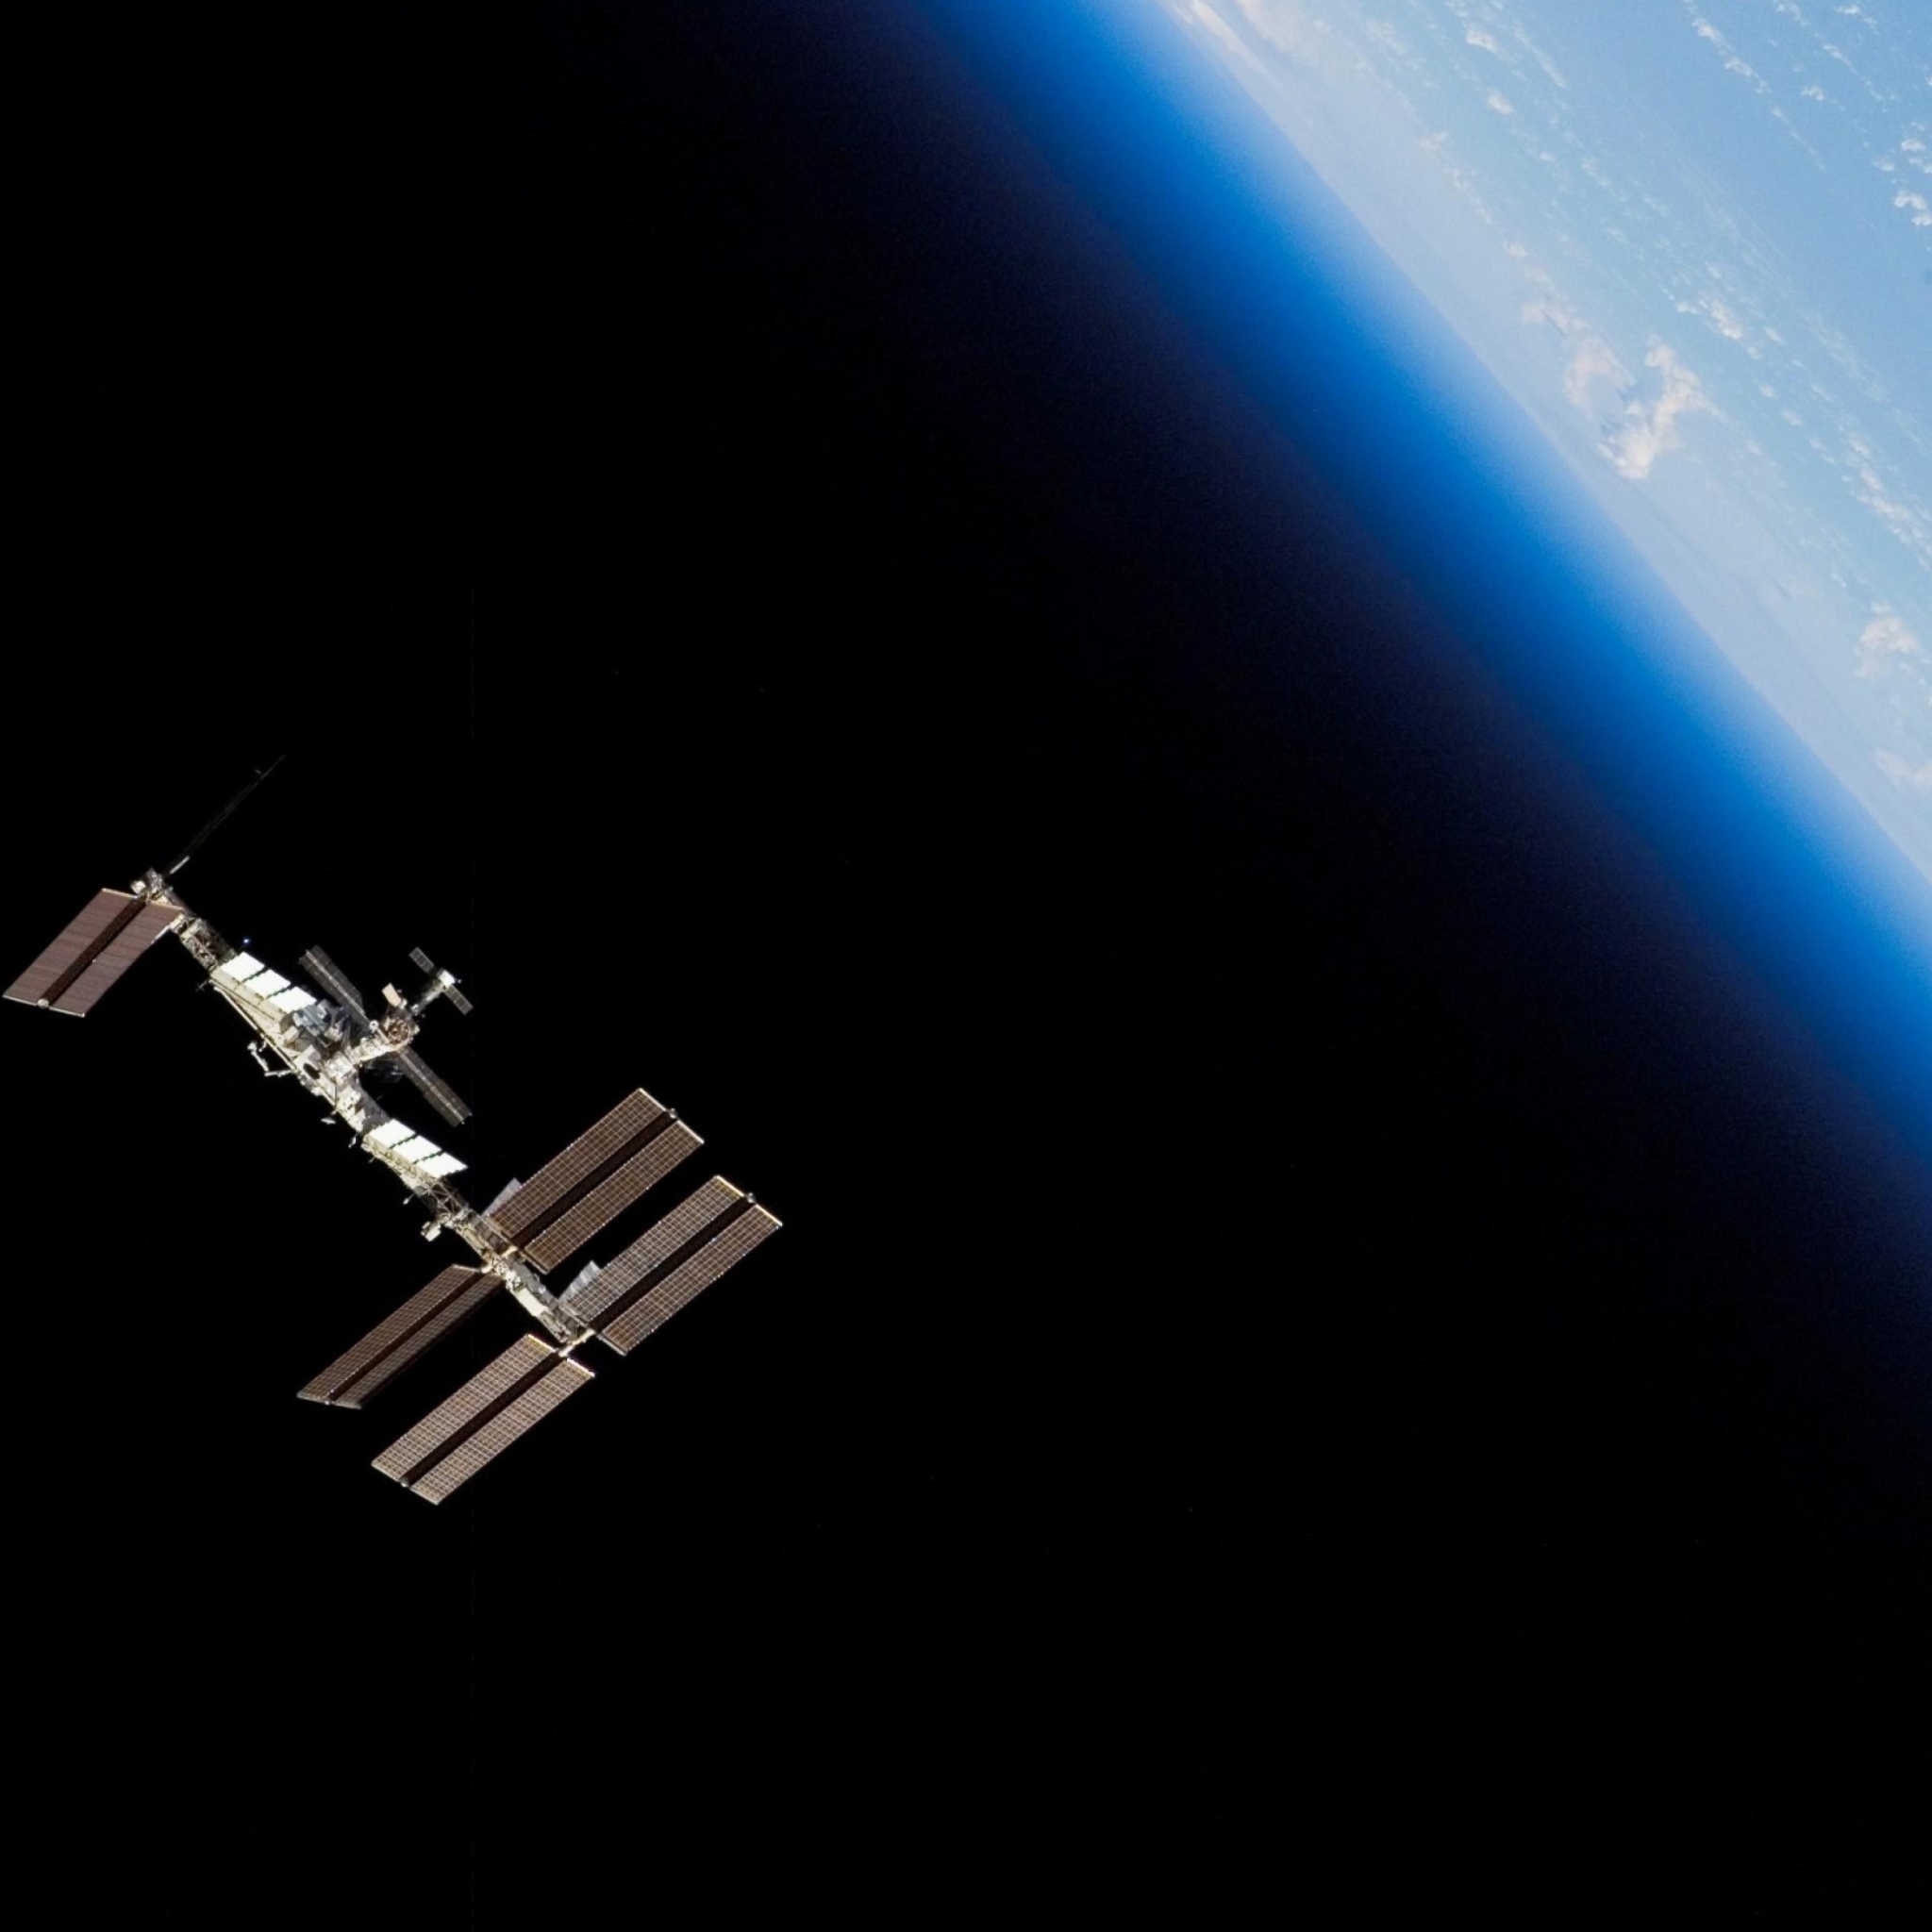 The ISS In Space screenshot #1 2048x2048